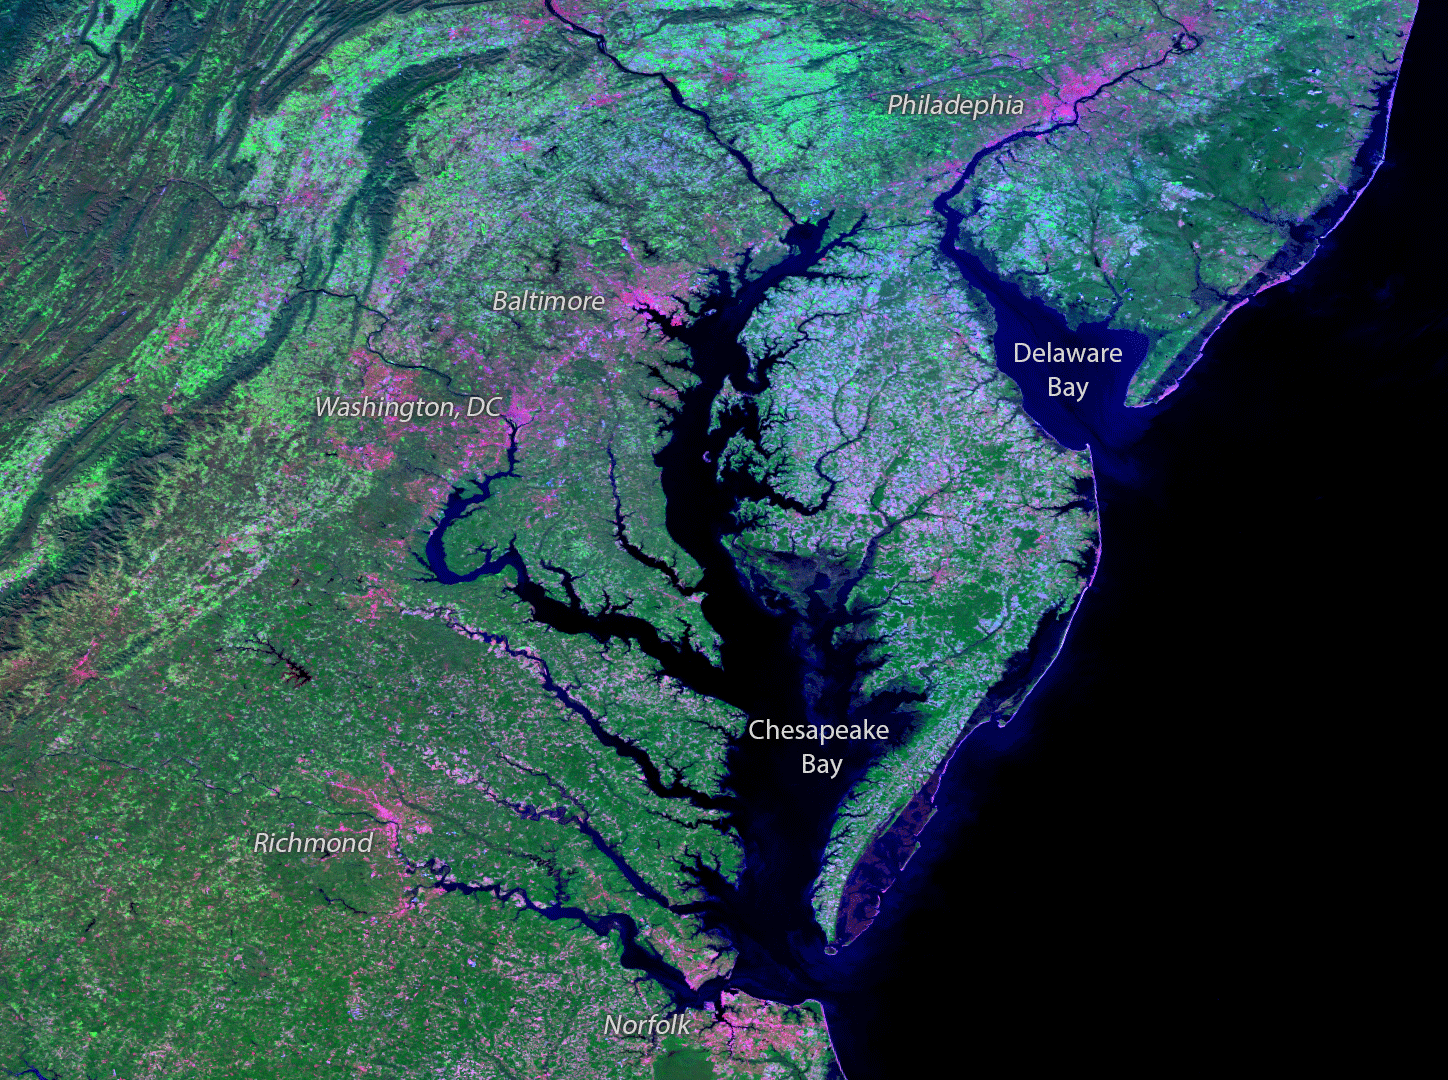 A false-color satellite image of the Chesapeake Bay and surrounding area differentiates land types in shades of bright pink and green. Pink indicates more barren areas, while green areas are vegetated. Deep blue indicates water. Most of the land surrounding the Bay is green, but areas around Baltimore, D.C., Richmond and Norfolk are pink due to urbanization.